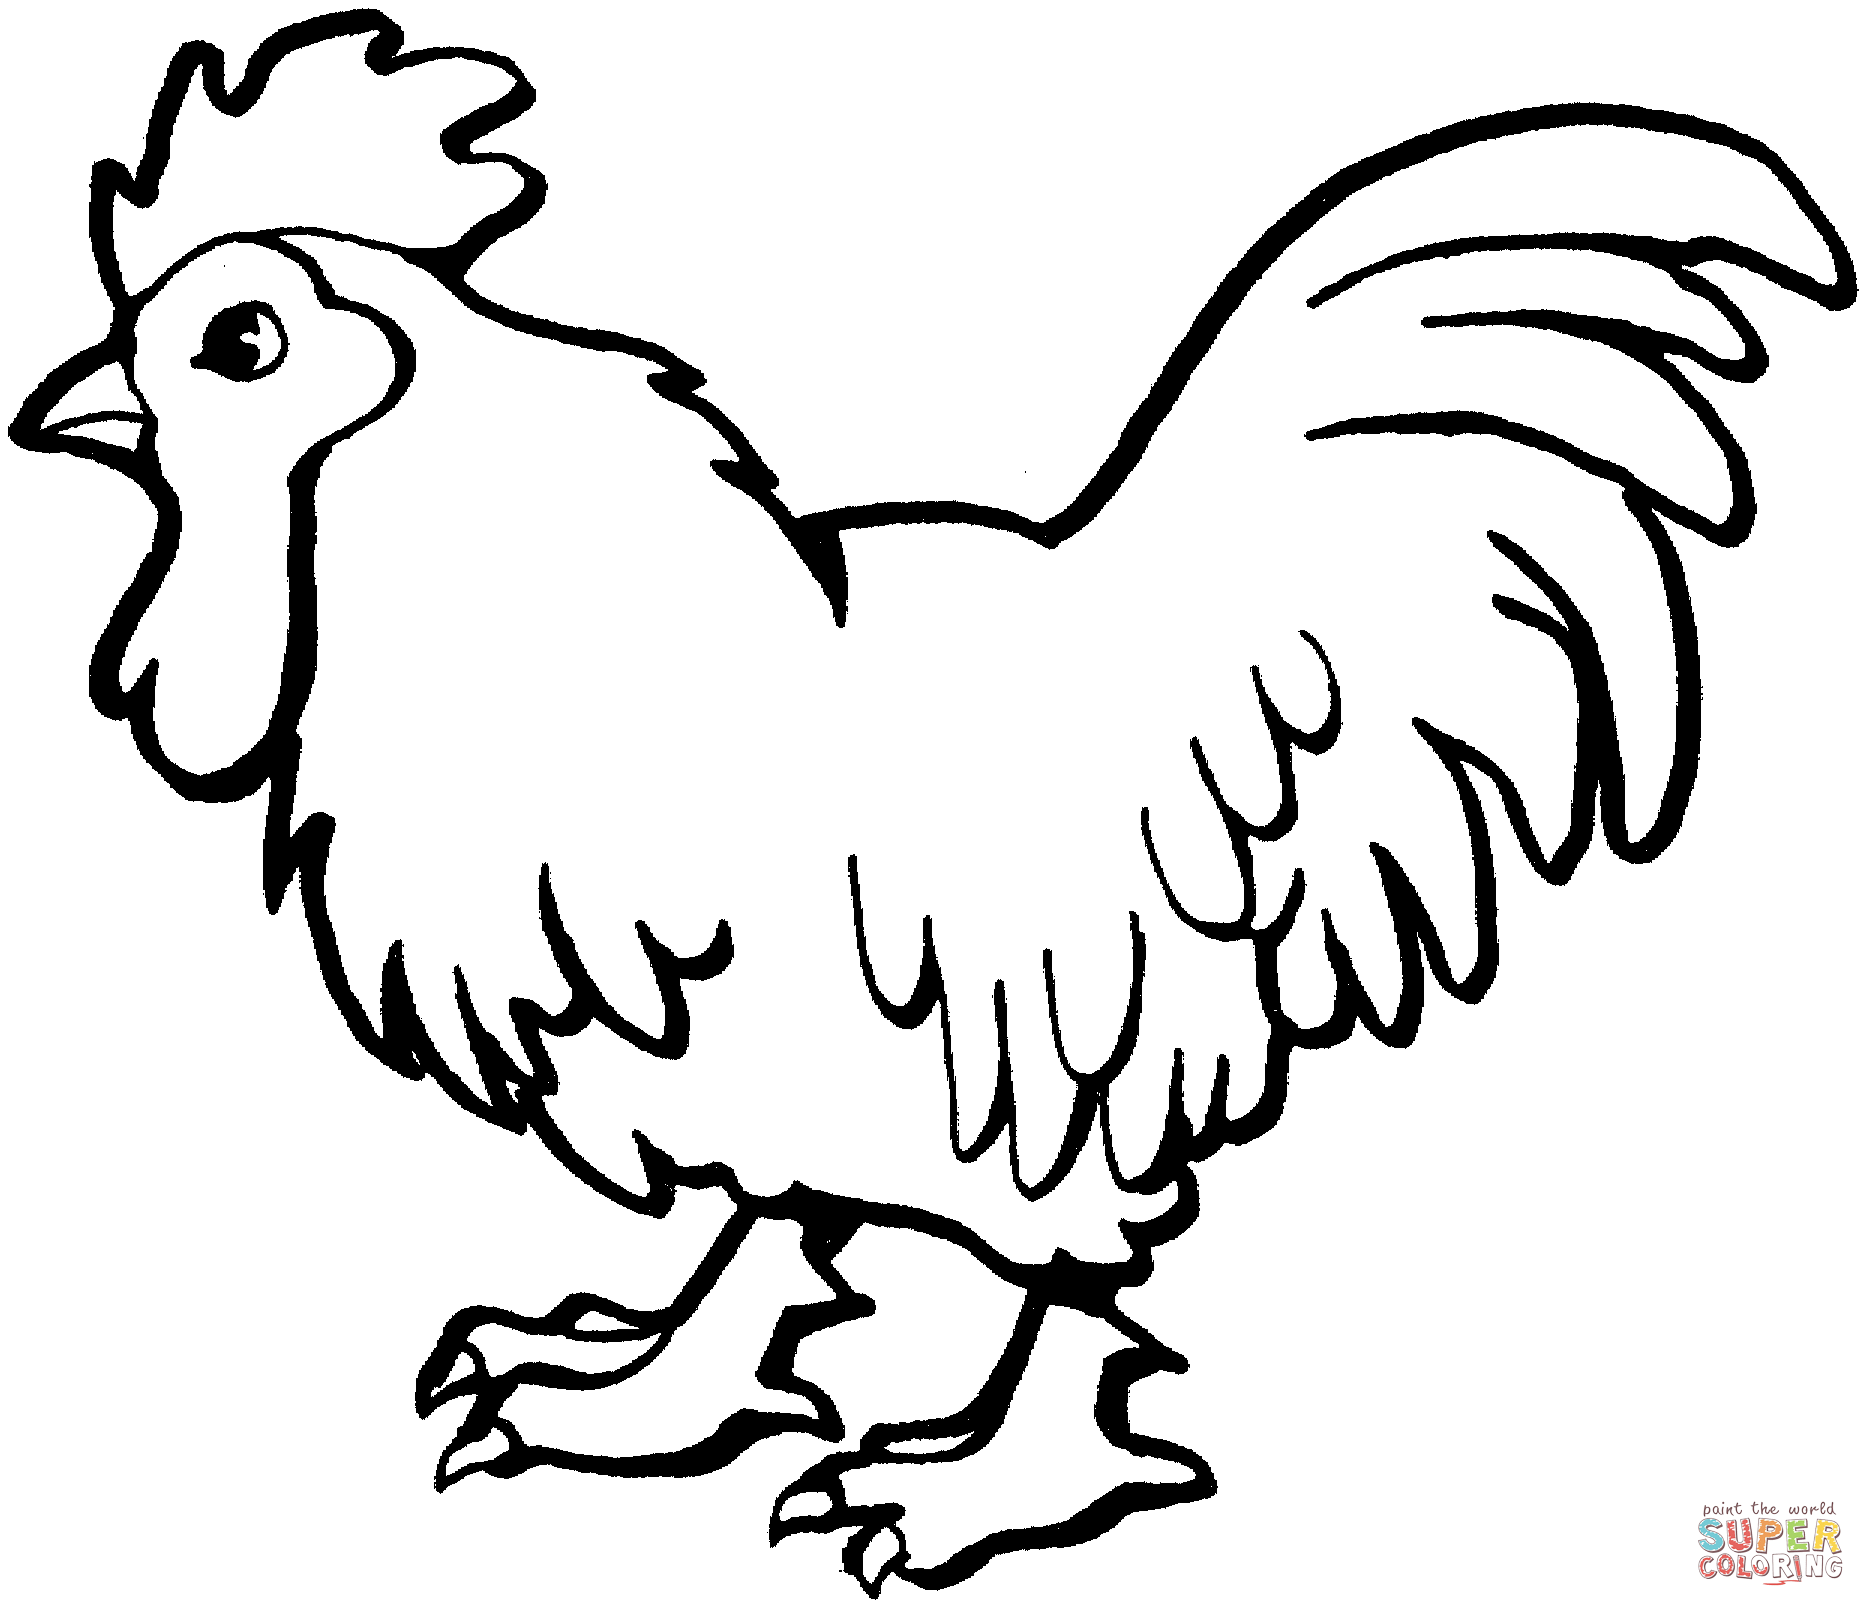 Rooster coloring #12, Download drawings